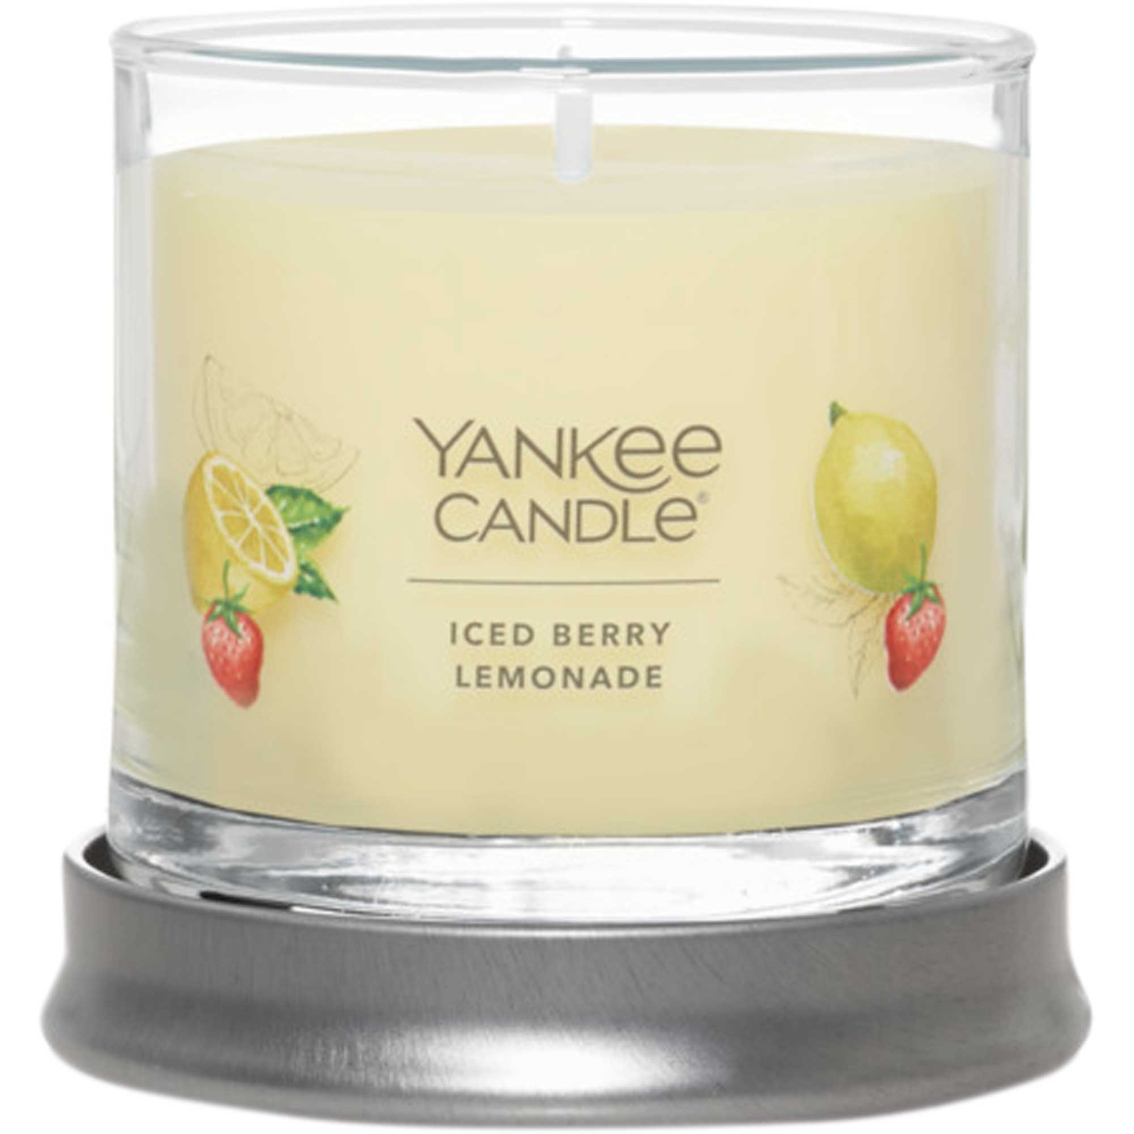 Yankee Candle Iced Berry Lemonade Signature Small Tumbler Candle - Image 2 of 2